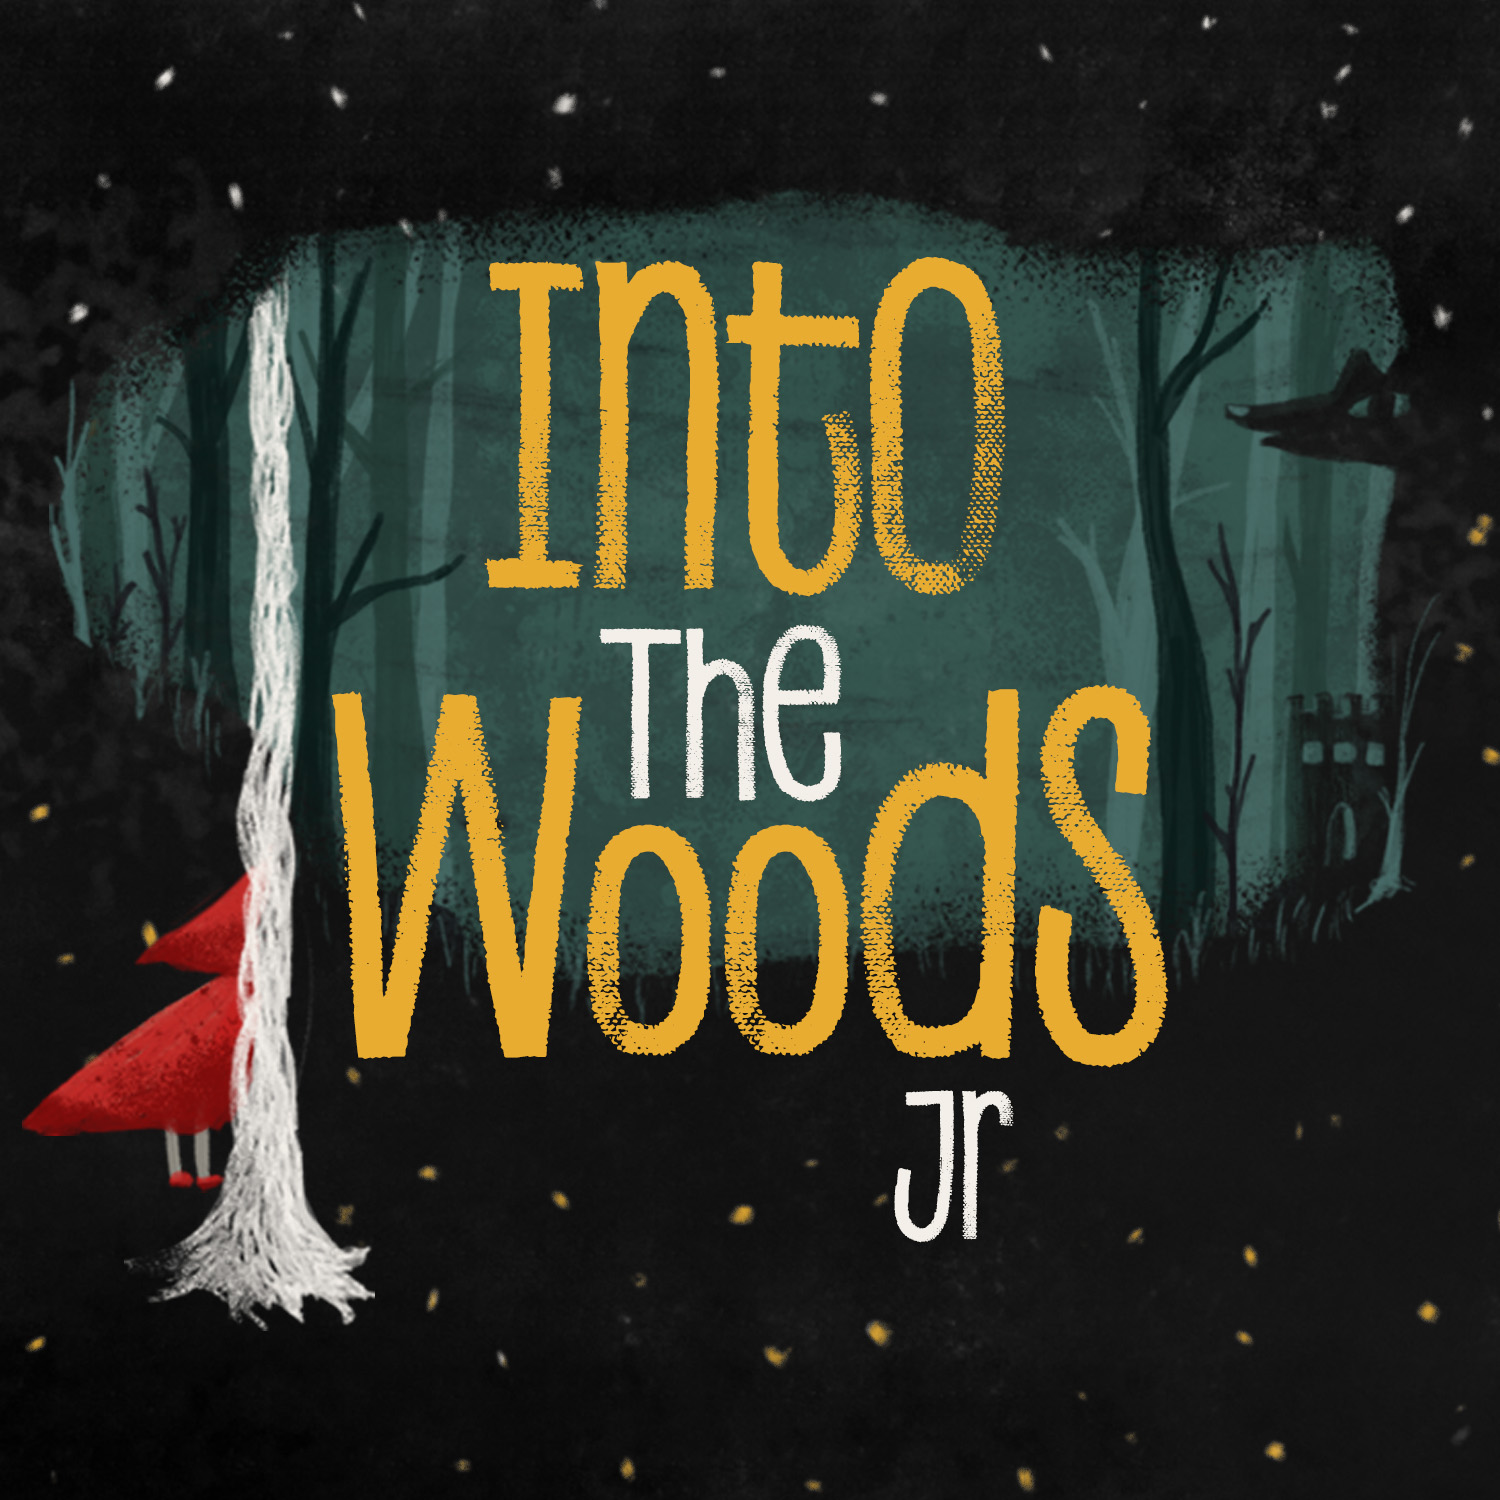 Into The Woods Jr